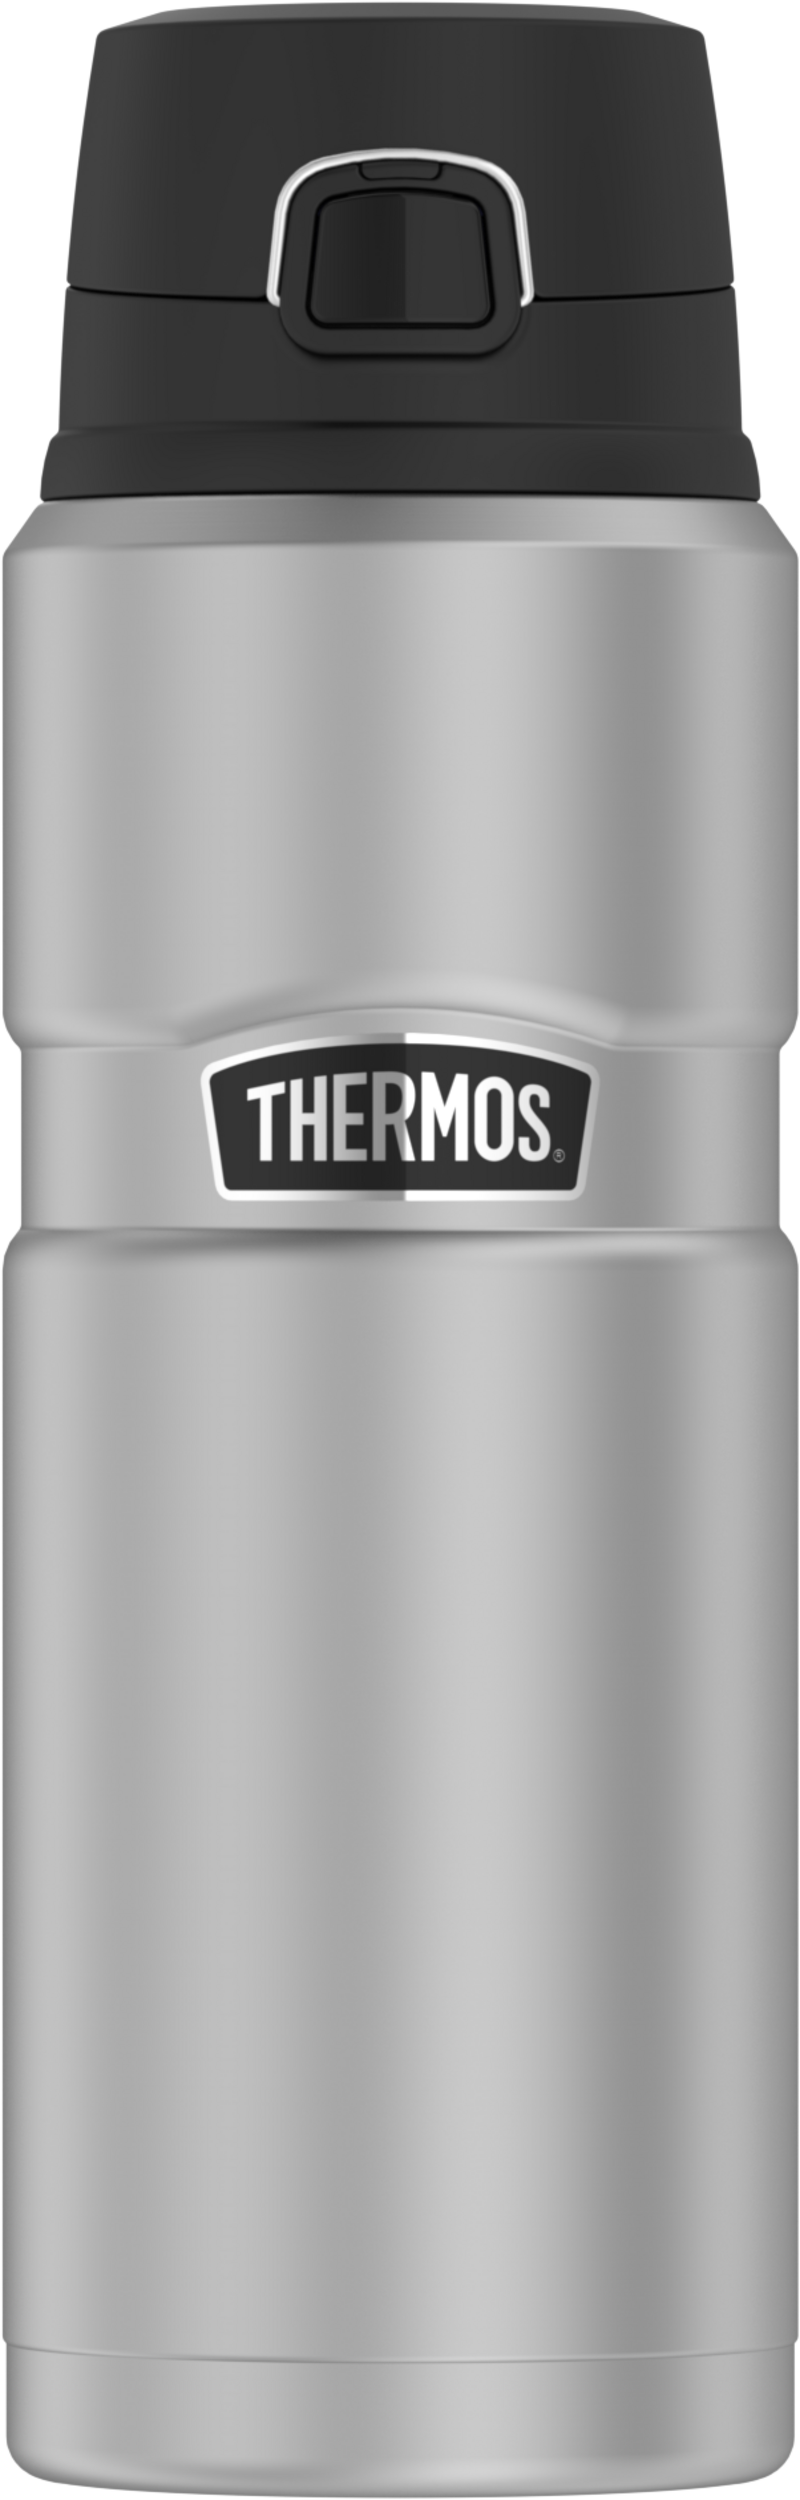 https://corporate.alfi.de/media/2021-01-01-cooling-royally-stainless-king-news-from-thermos/4010205070.png